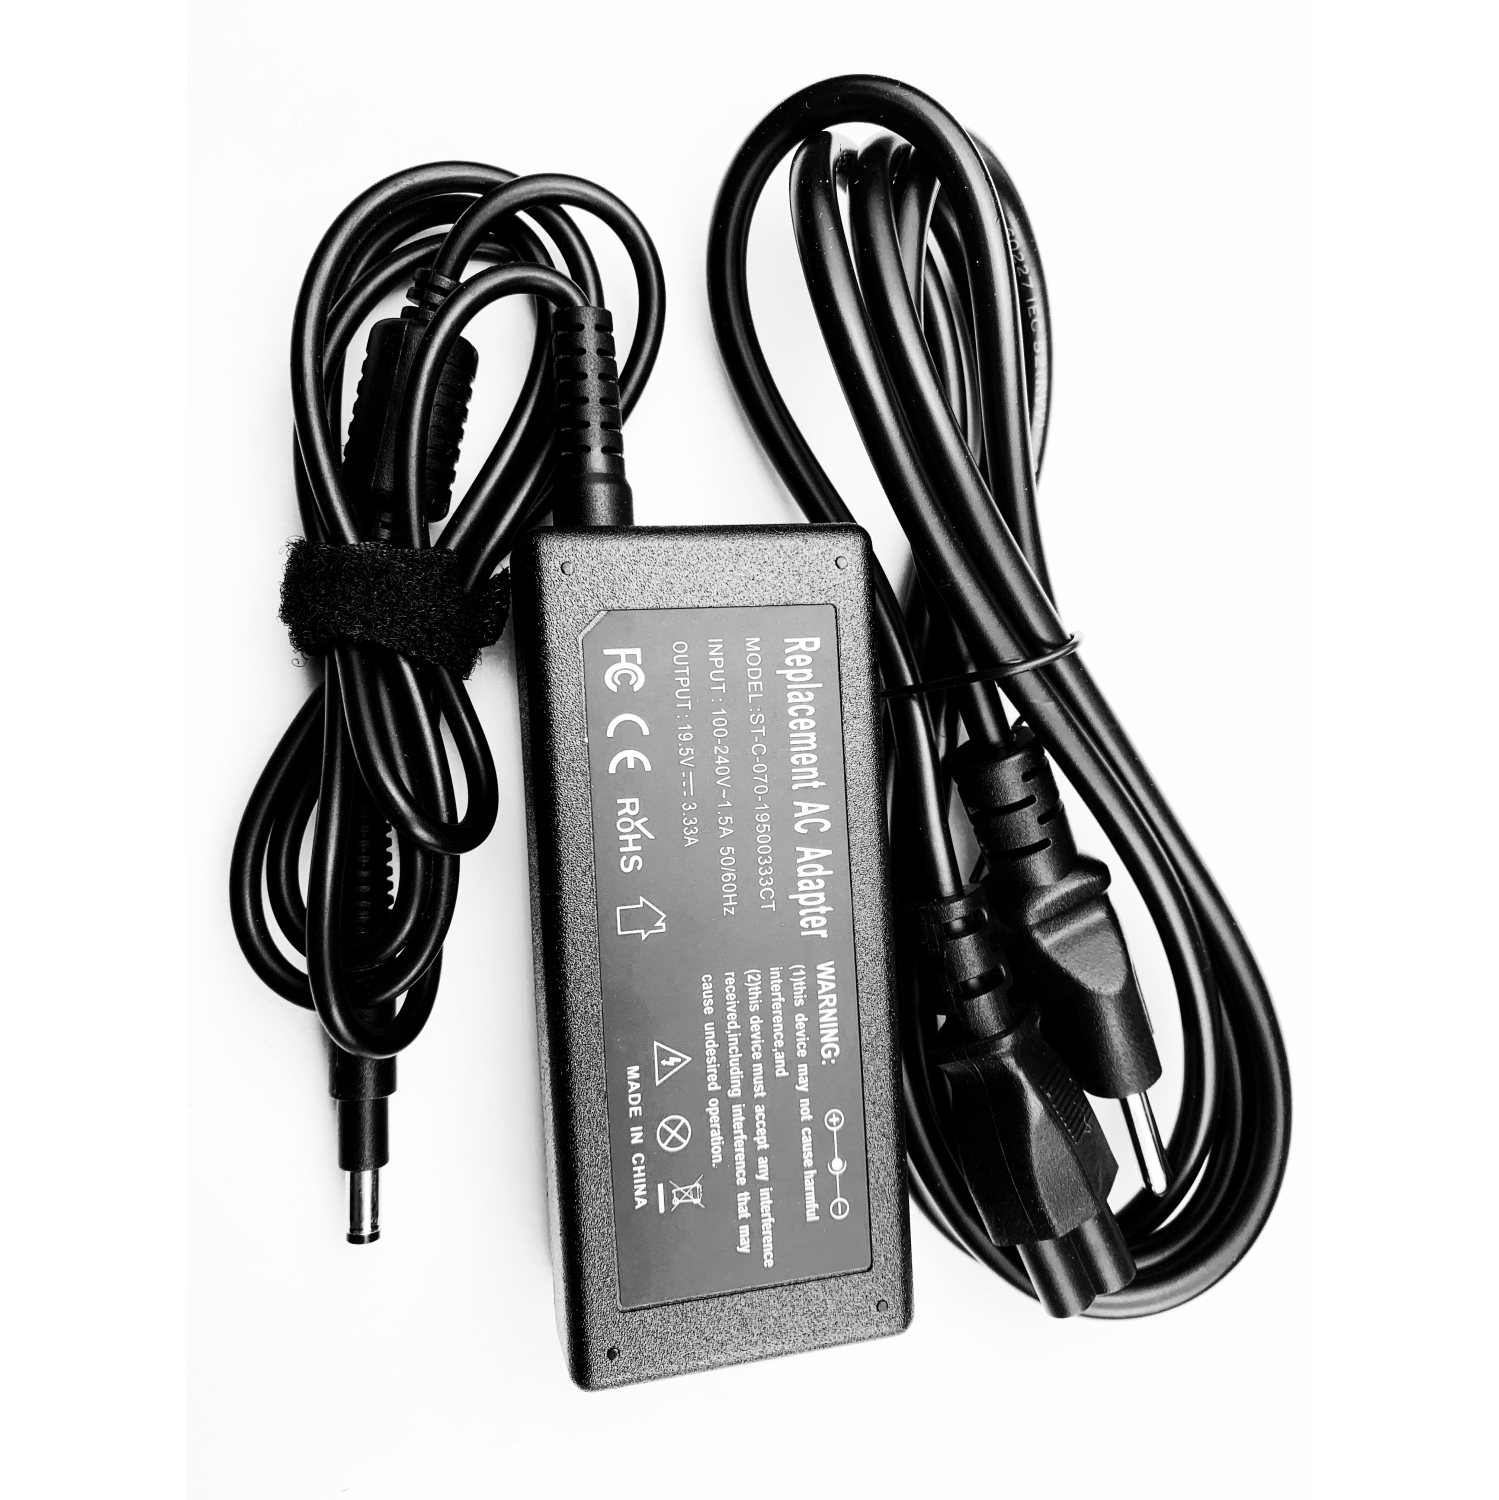 19.5V 65W 4.75mm x 1.7mm new AC adapter power cord charger for HP Envy TouchSmart Ultrabook 4-1215dx 4t-1200